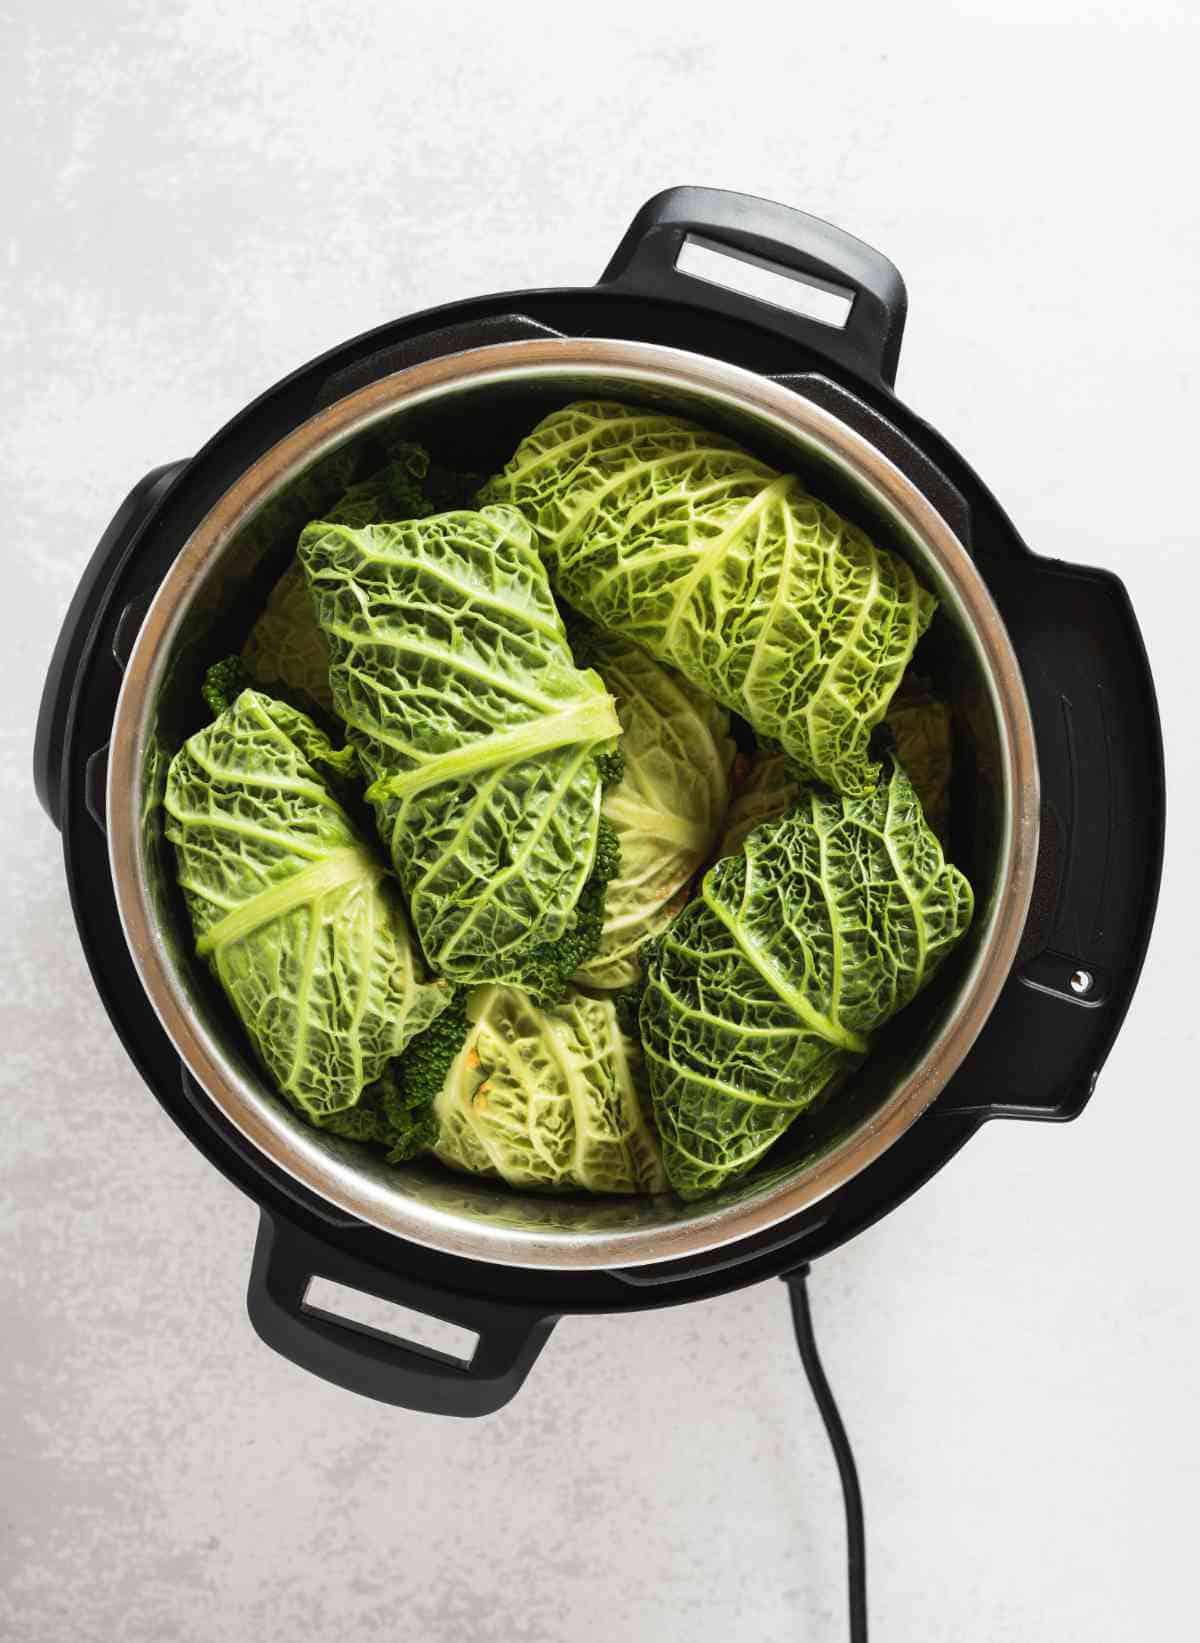 cabbage rolls in an Instant Pot cooking appliance.